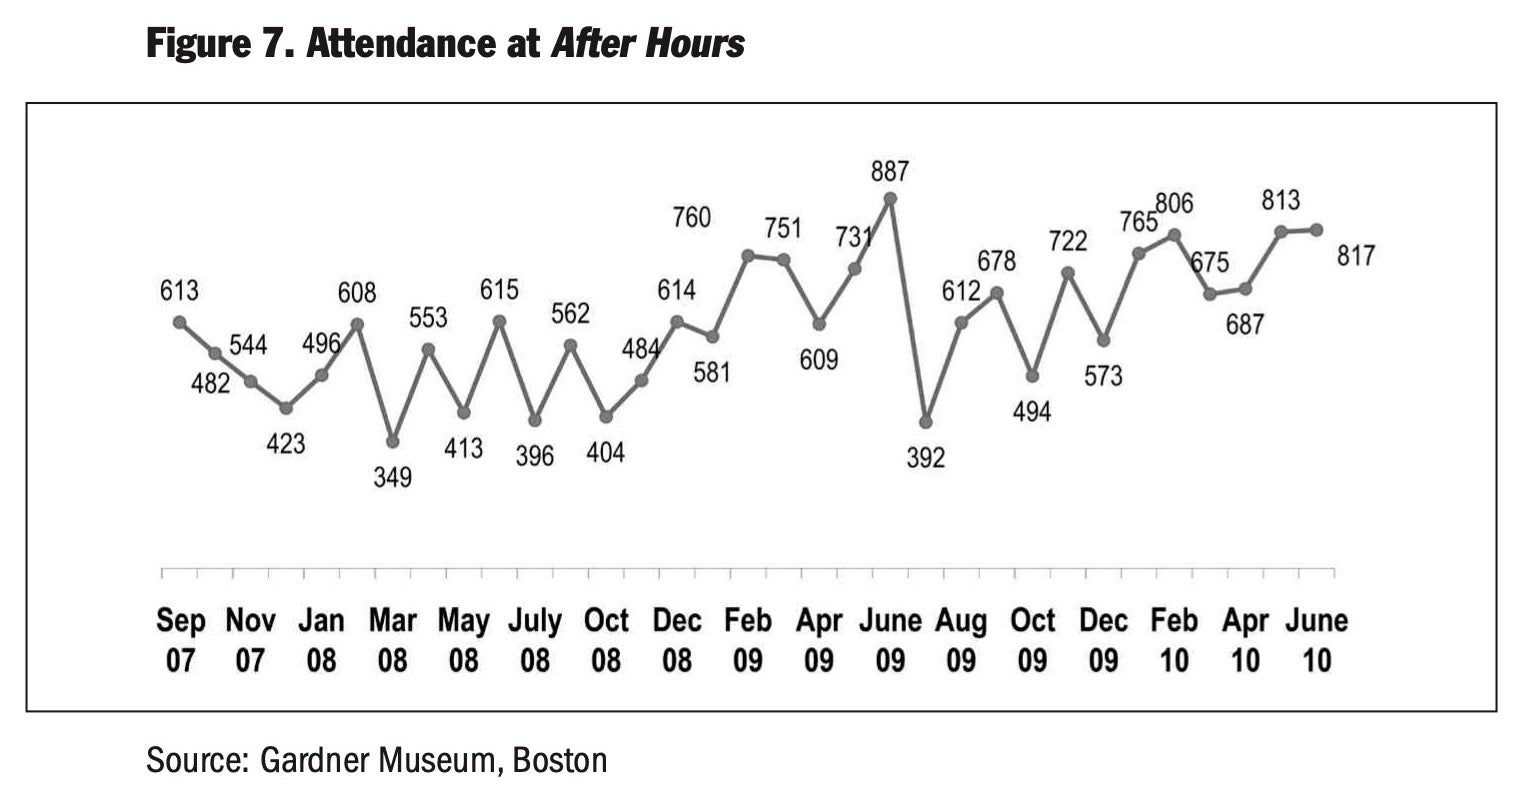 Chart showing attendance at "After Hours" between 2007 and 2010.